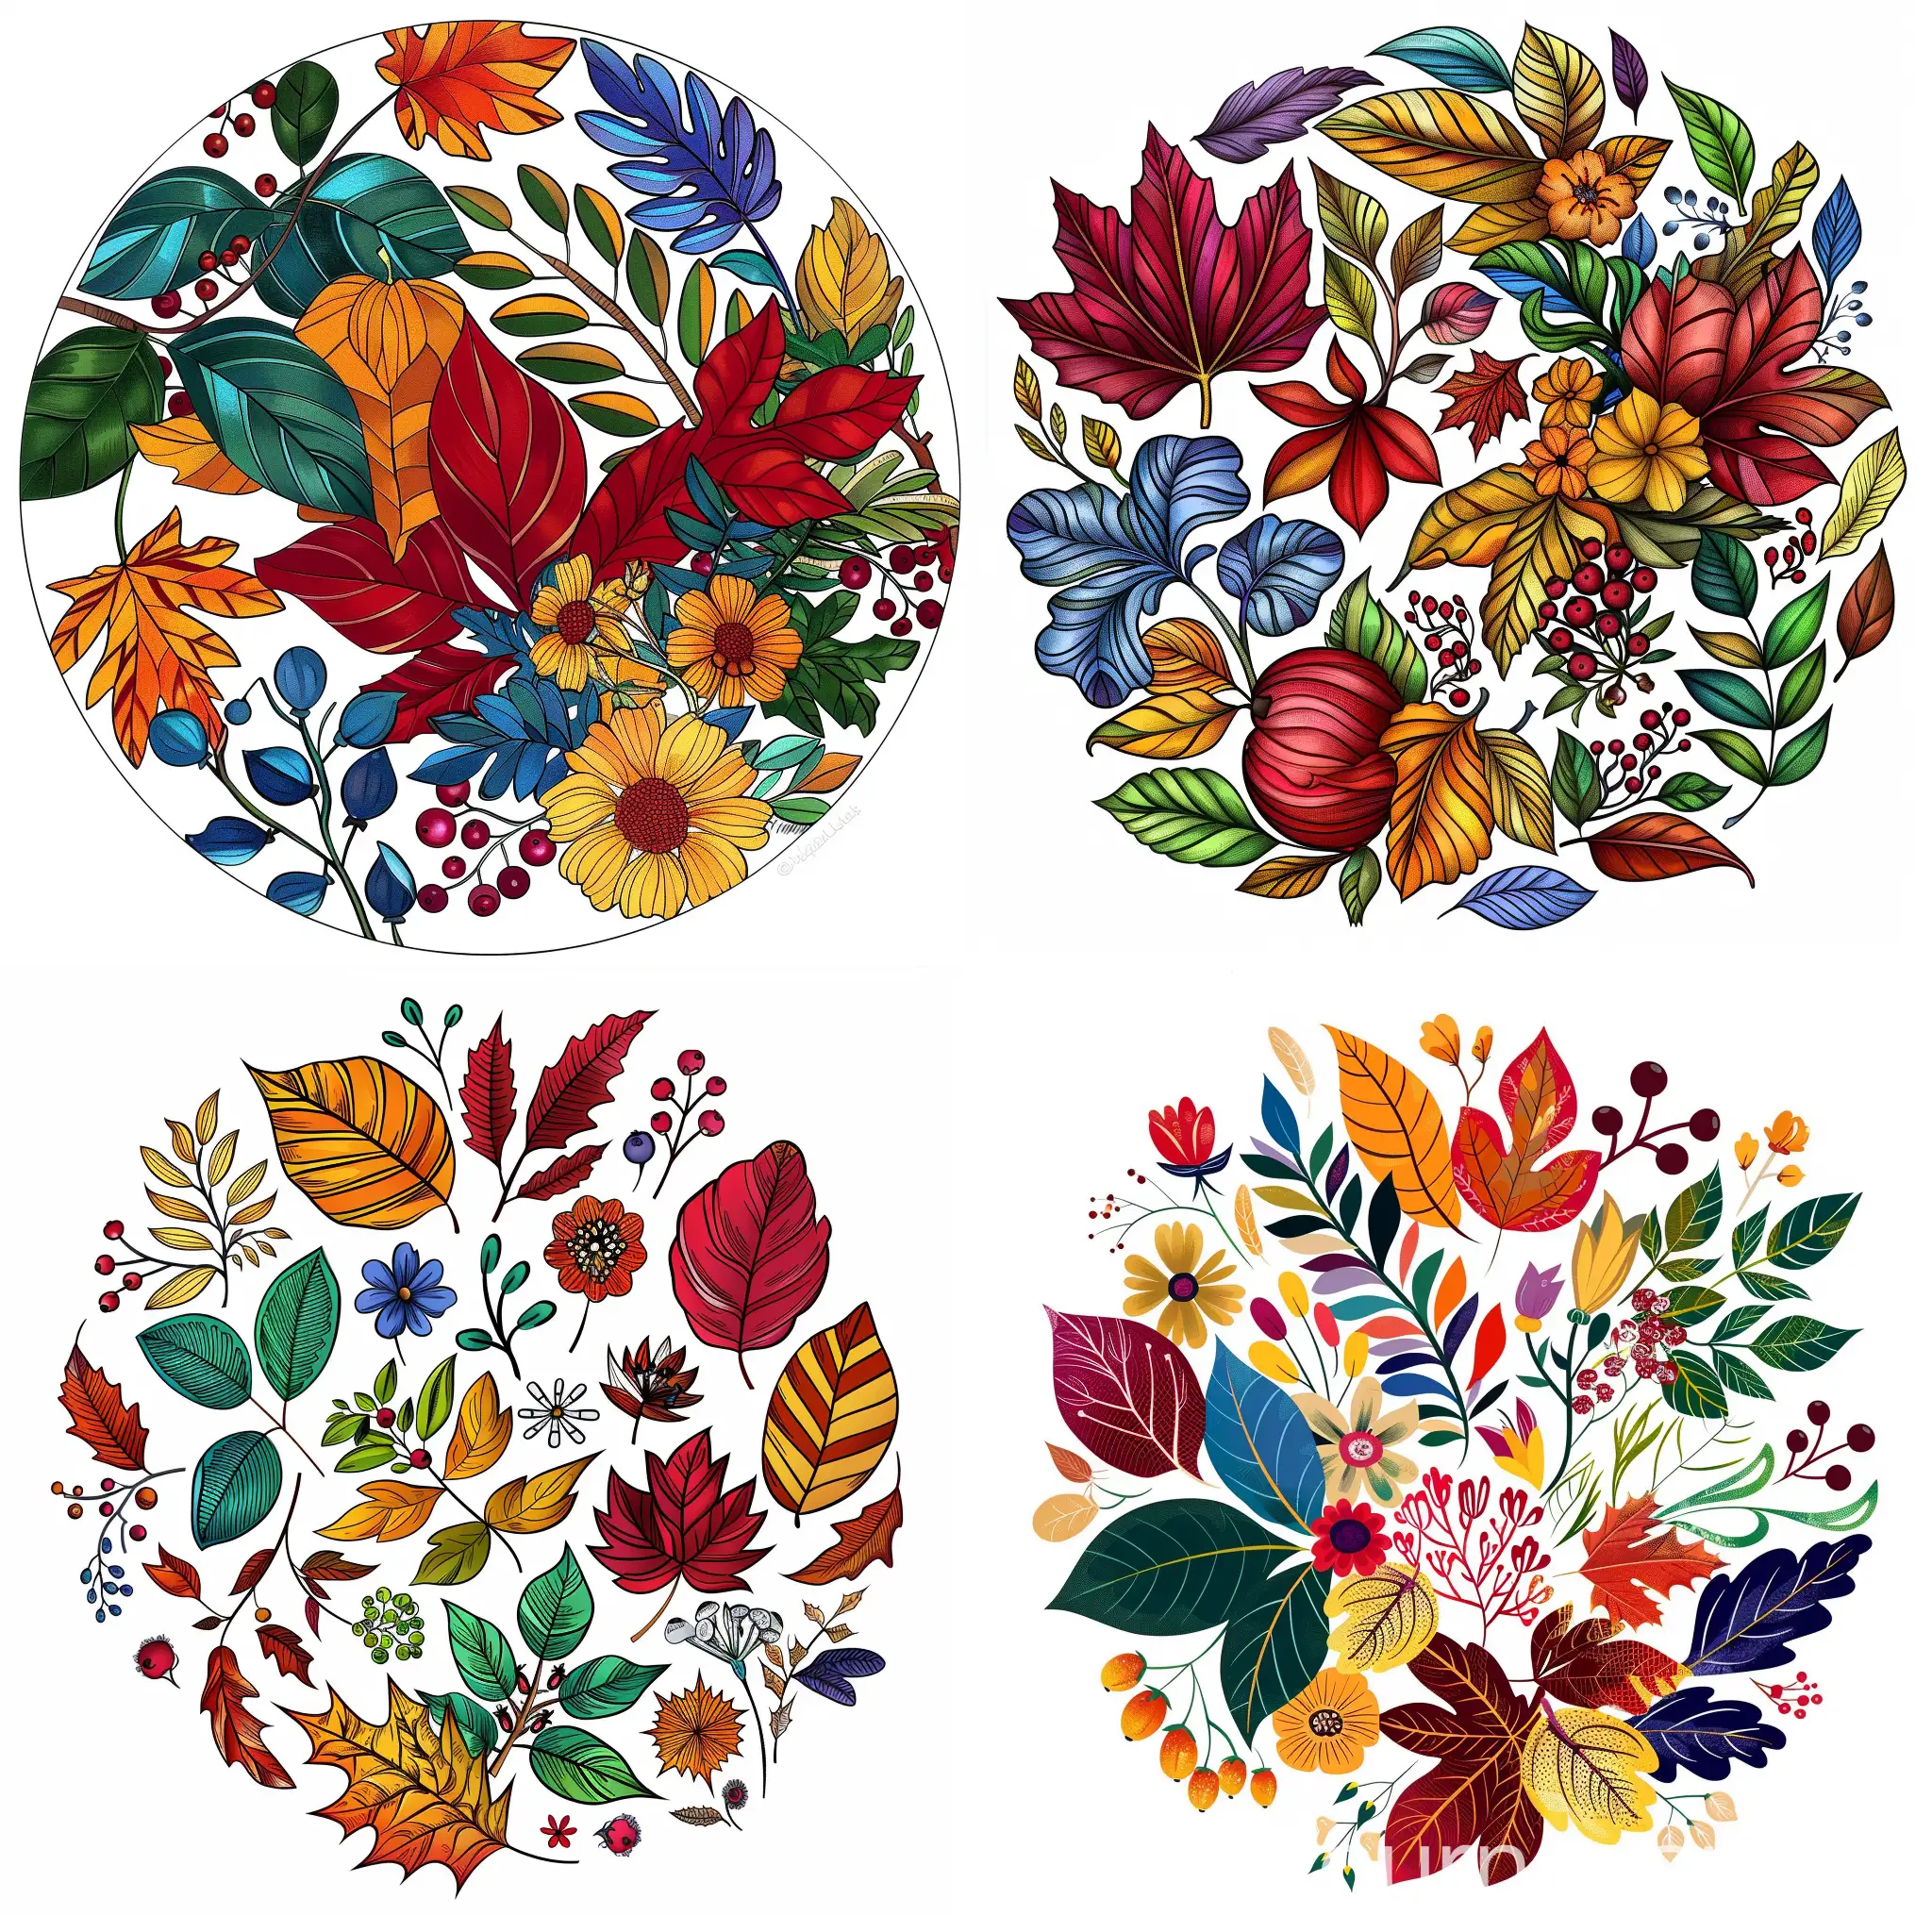 an ornamental round drawing dedicated to autumn, including autumn leaves, flowers, berries, delicate colors, orange, red, burgundy, yellow, green, emerald, blue, on a white background, few details, smooth lines, decorative illustration